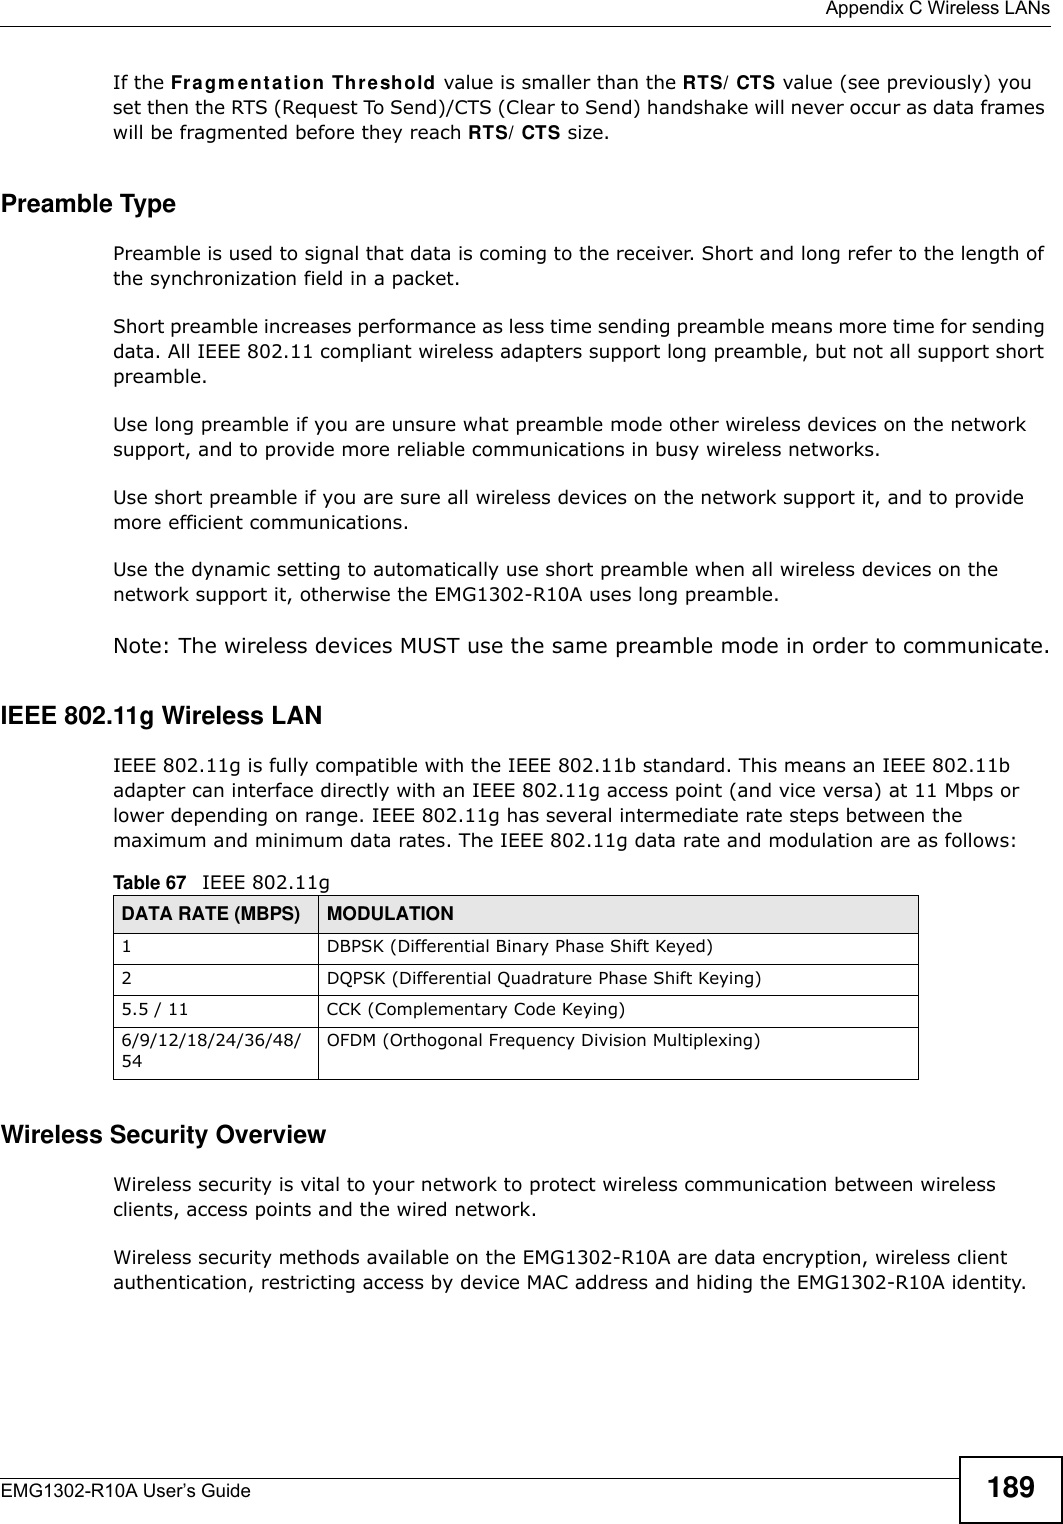  Appendix C Wireless LANsEMG1302-R10A User’s Guide 189If the Fragm ent at ion Thr eshold value is smaller than the RTS/ CTS value (see previously) you set then the RTS (Request To Send)/CTS (Clear to Send) handshake will never occur as data frames will be fragmented before they reach RTS/ CTS size.Preamble TypePreamble is used to signal that data is coming to the receiver. Short and long refer to the length of the synchronization field in a packet.Short preamble increases performance as less time sending preamble means more time for sending data. All IEEE 802.11 compliant wireless adapters support long preamble, but not all support short preamble. Use long preamble if you are unsure what preamble mode other wireless devices on the network support, and to provide more reliable communications in busy wireless networks. Use short preamble if you are sure all wireless devices on the network support it, and to provide more efficient communications.Use the dynamic setting to automatically use short preamble when all wireless devices on the network support it, otherwise the EMG1302-R10A uses long preamble.Note: The wireless devices MUST use the same preamble mode in order to communicate.IEEE 802.11g Wireless LANIEEE 802.11g is fully compatible with the IEEE 802.11b standard. This means an IEEE 802.11b adapter can interface directly with an IEEE 802.11g access point (and vice versa) at 11 Mbps or lower depending on range. IEEE 802.11g has several intermediate rate steps between the maximum and minimum data rates. The IEEE 802.11g data rate and modulation are as follows:Wireless Security OverviewWireless security is vital to your network to protect wireless communication between wireless clients, access points and the wired network.Wireless security methods available on the EMG1302-R10A are data encryption, wireless client authentication, restricting access by device MAC address and hiding the EMG1302-R10A identity.Table 67   IEEE 802.11gDATA RATE (MBPS) MODULATION1 DBPSK (Differential Binary Phase Shift Keyed)2 DQPSK (Differential Quadrature Phase Shift Keying)5.5 / 11 CCK (Complementary Code Keying) 6/9/12/18/24/36/48/54OFDM (Orthogonal Frequency Division Multiplexing) 